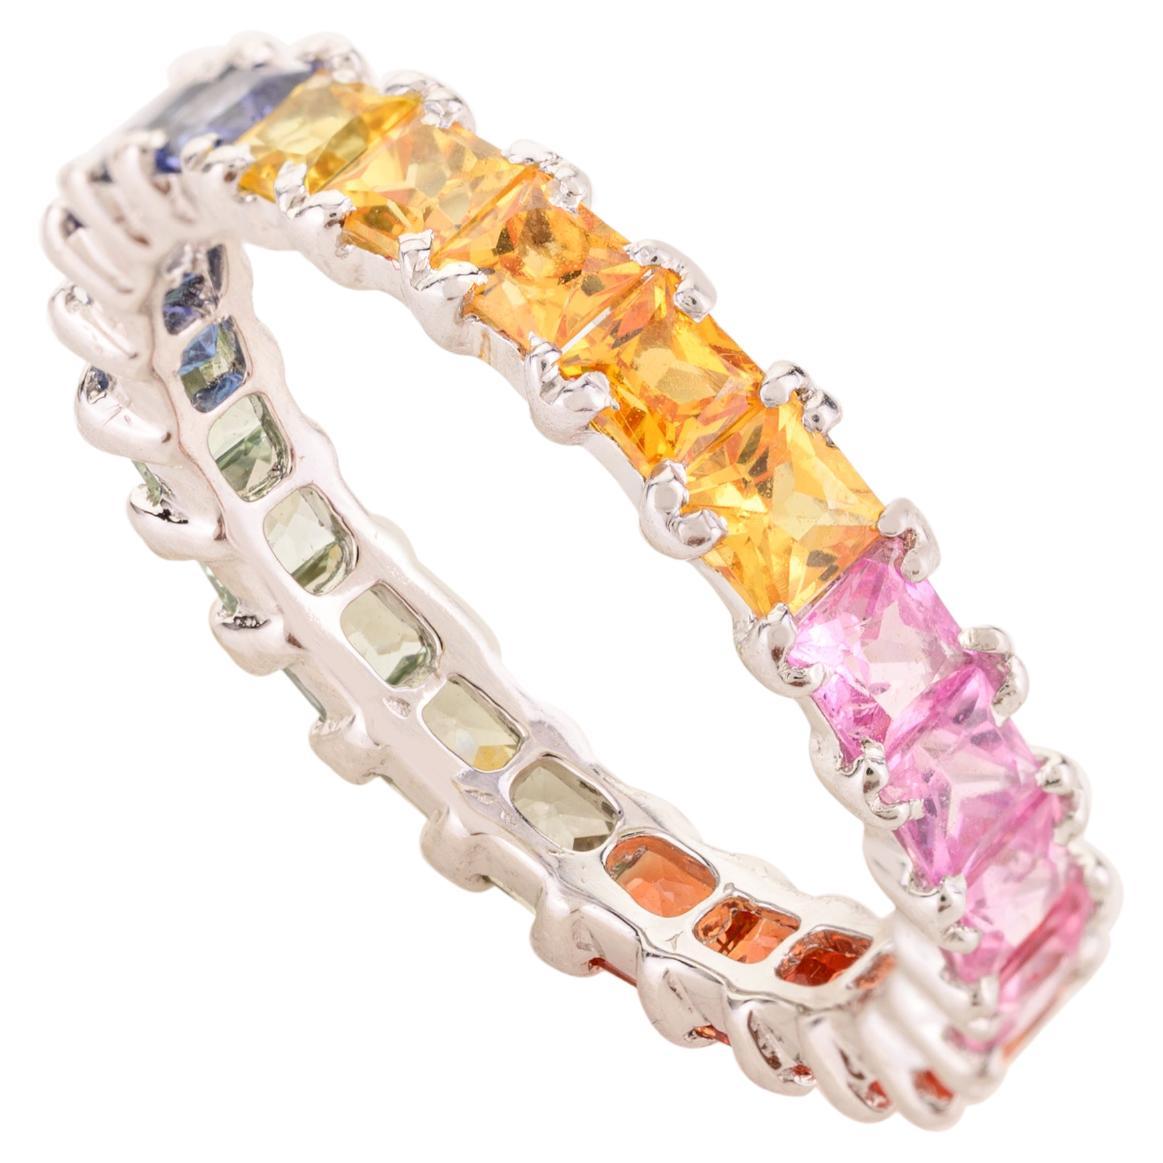 14k White Gold Square Cut Multi Sapphire Eternity Band Ring Gift for Girlfriend